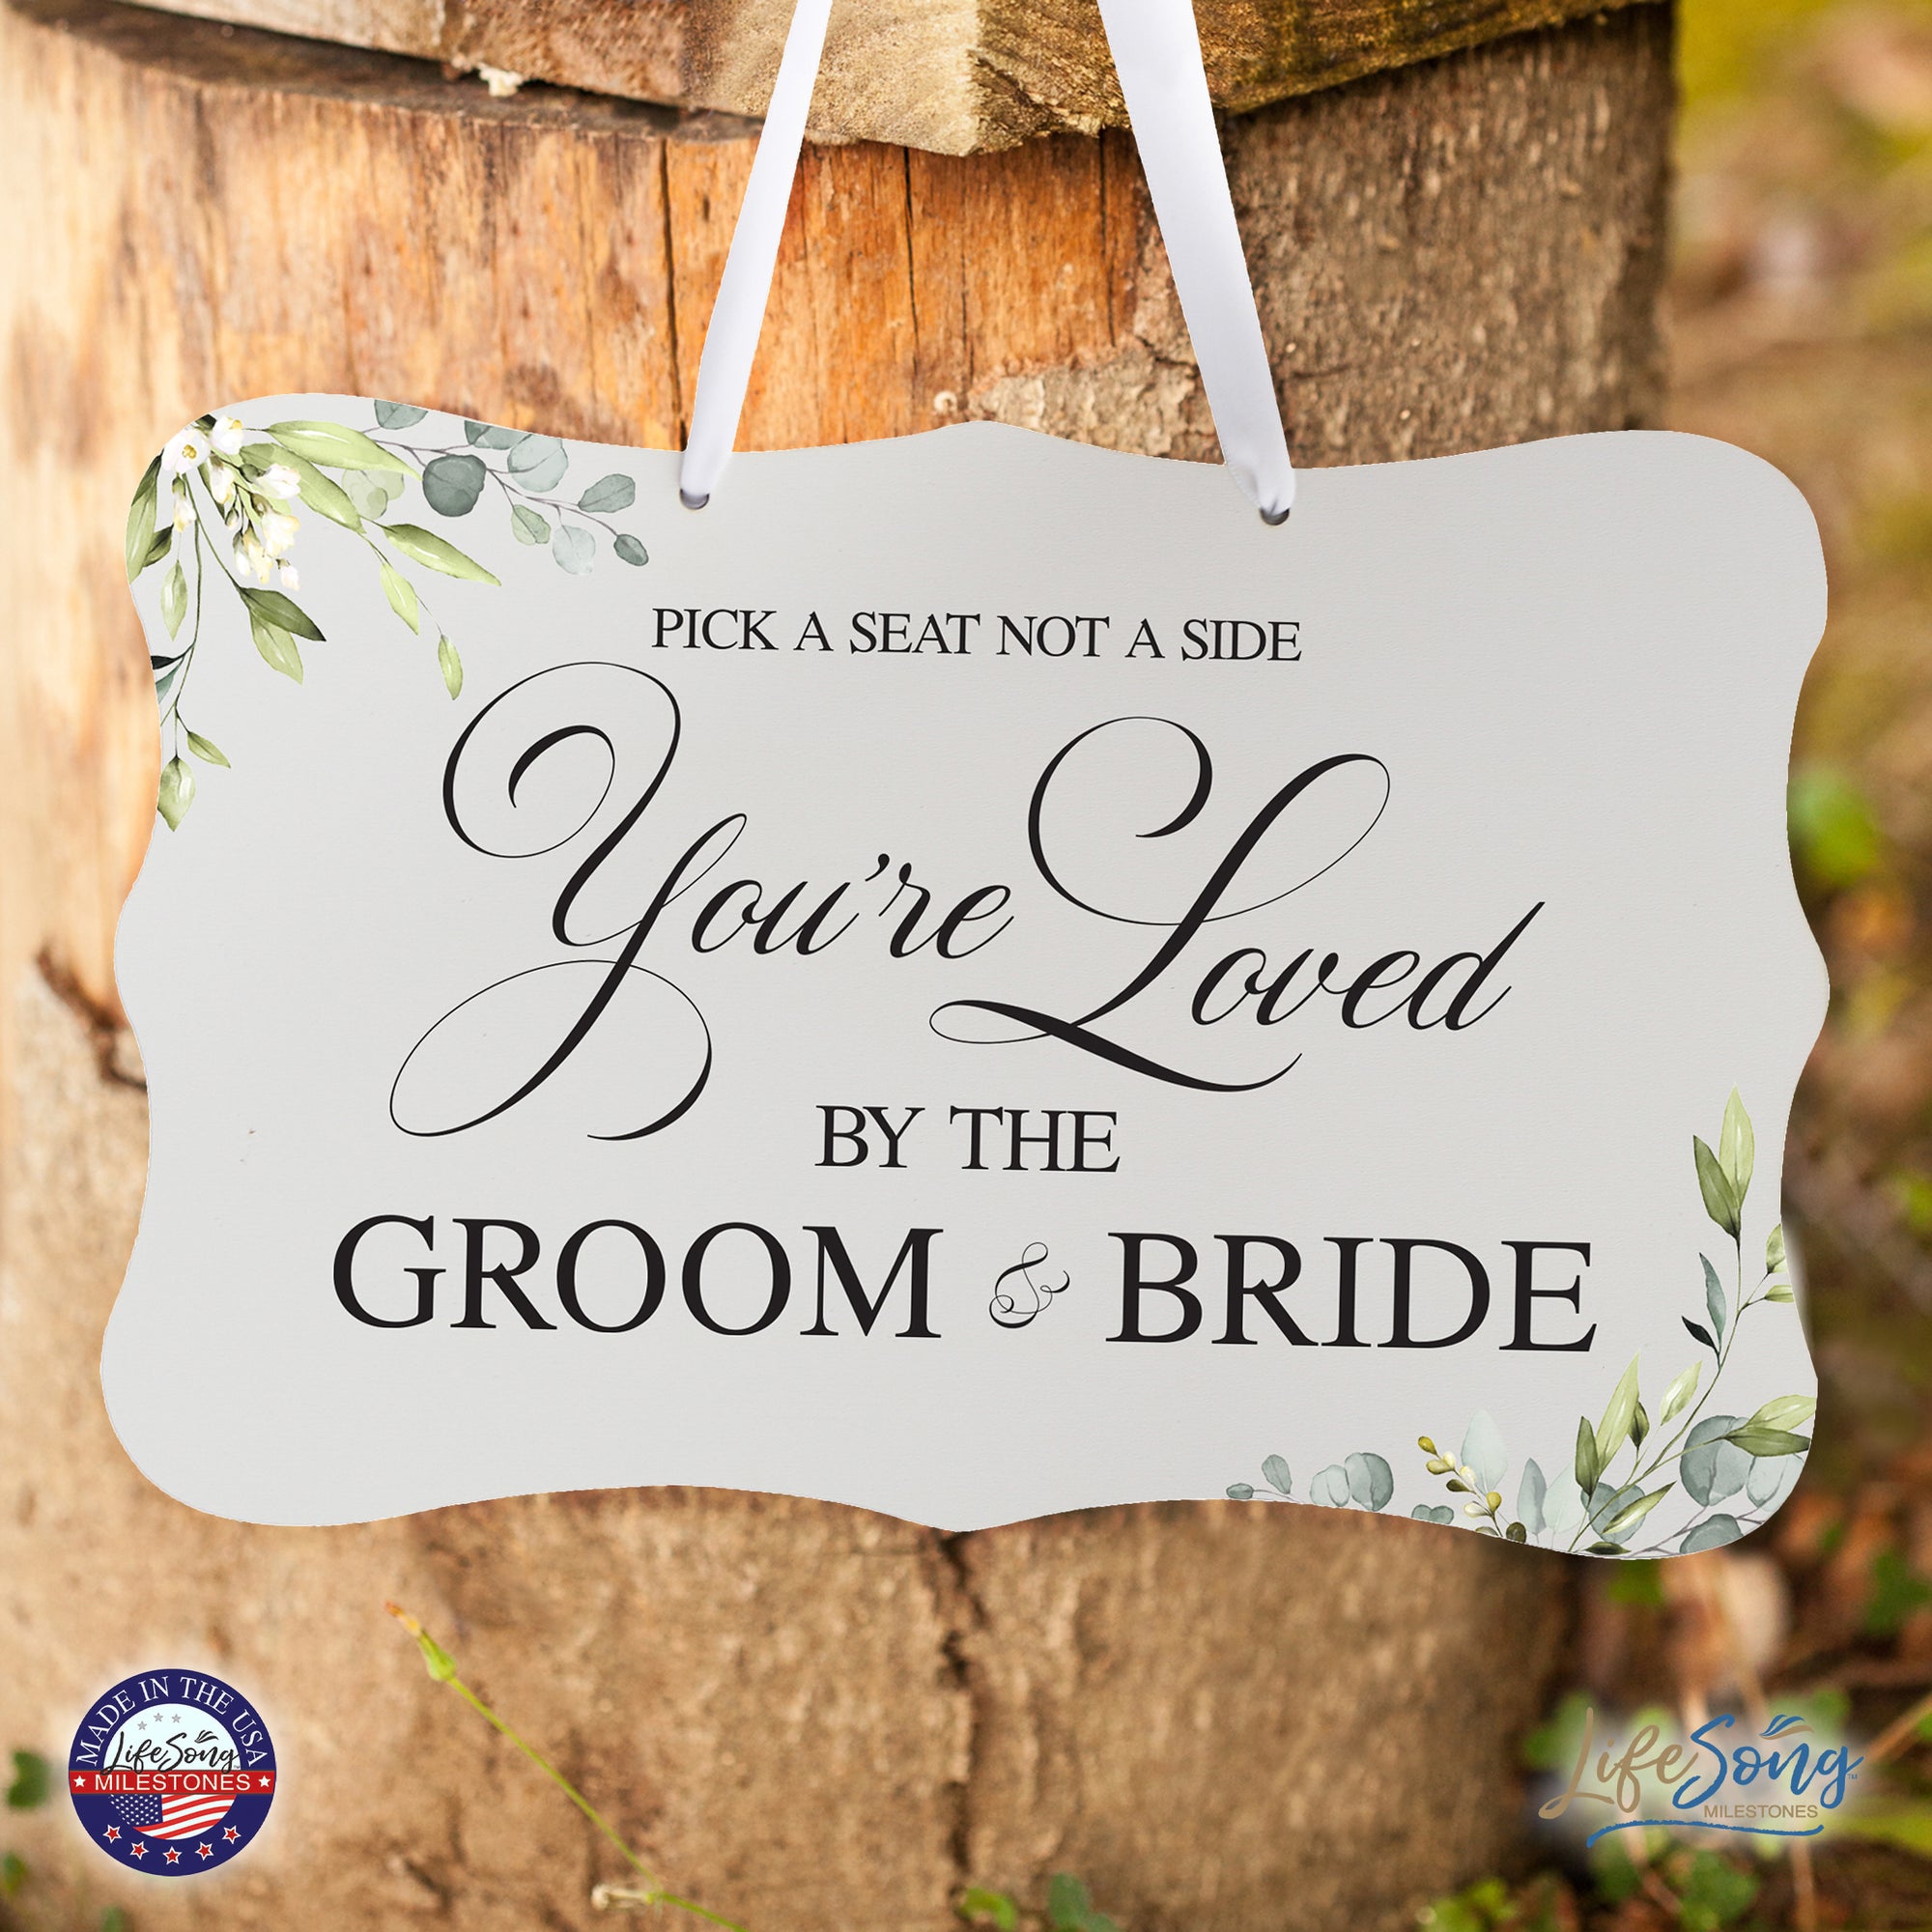 Wedding Wall Hanging Signs For Ceremony And Reception For Couples - Pick A Seat